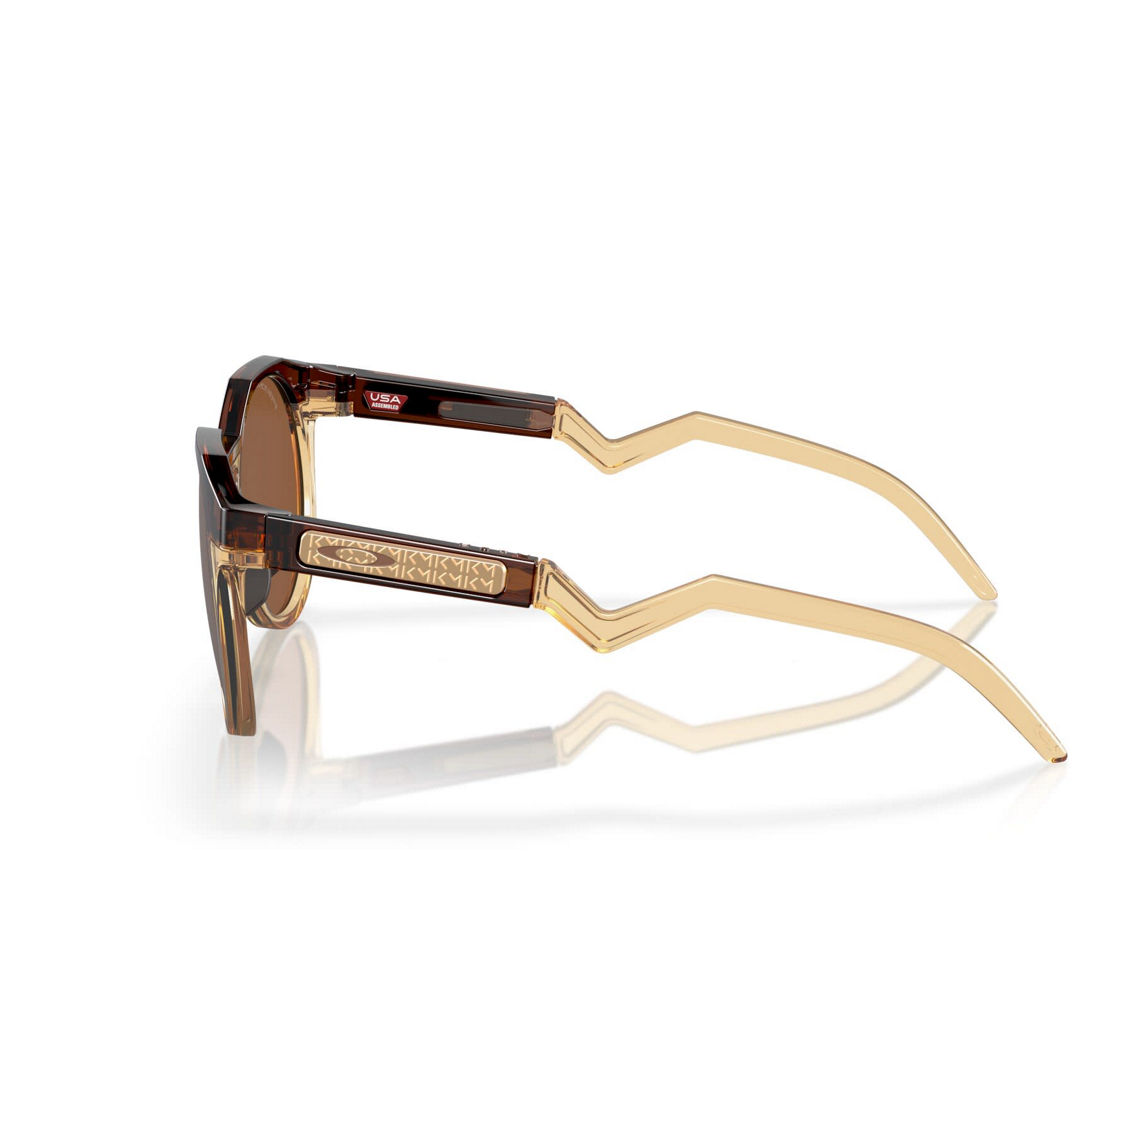 Oakley OO9242 Kylian Mbappé Signature Series HSTN - Image 3 of 5